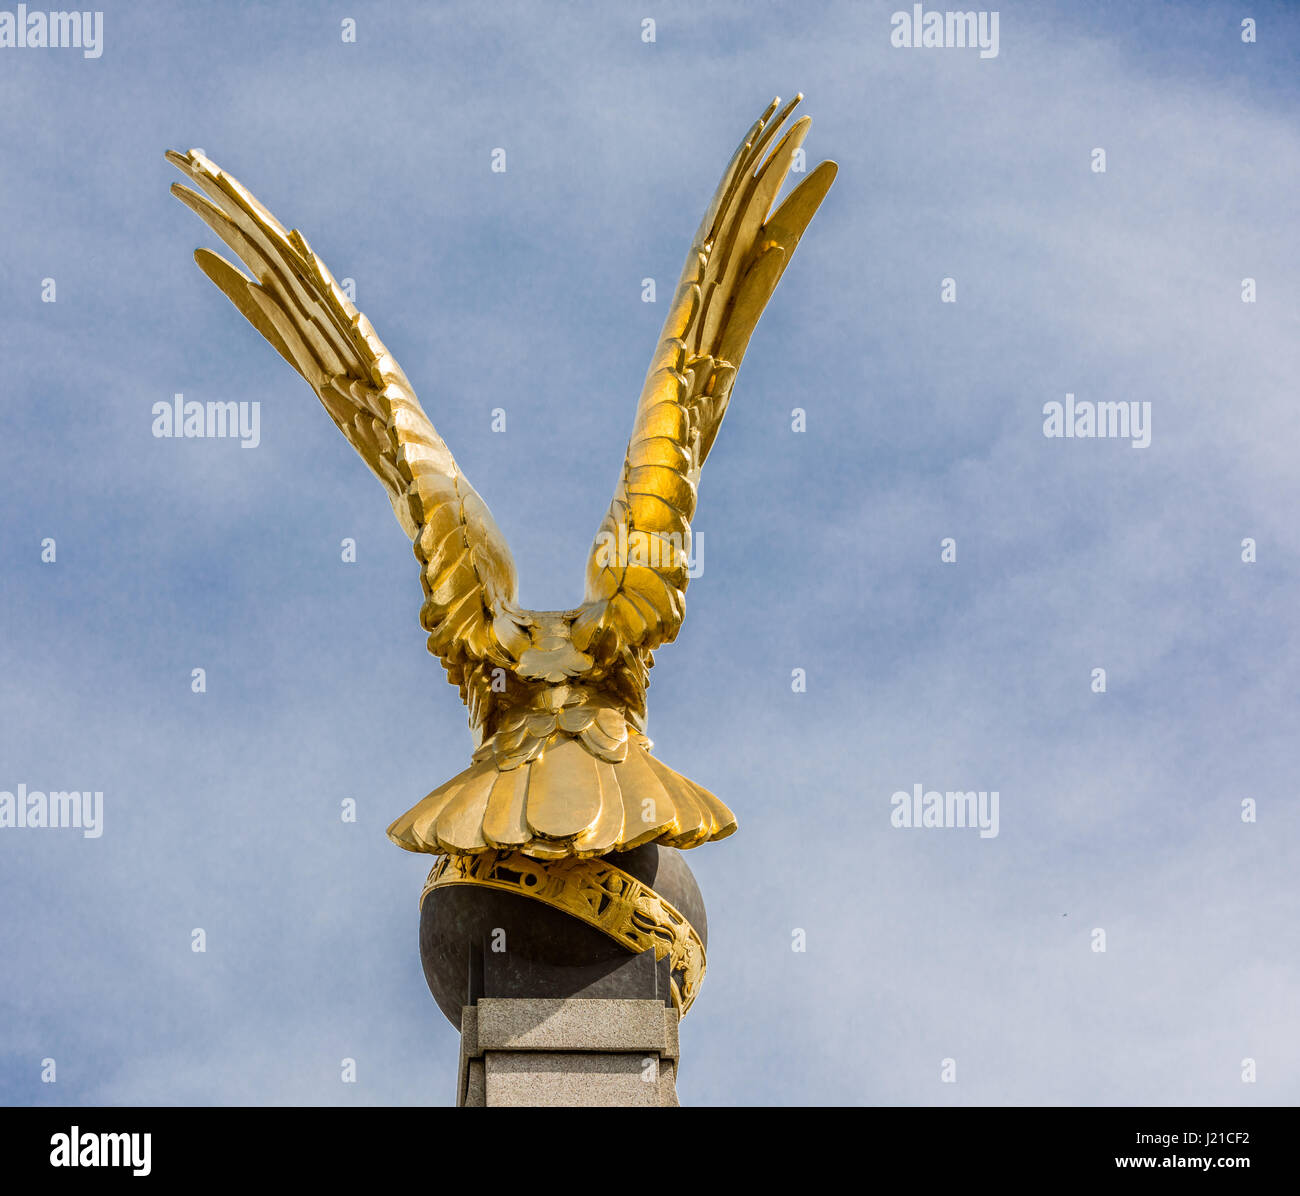 a fold winged eagle on a war memorials sculpture in a public park in London England, UK Stock Photo